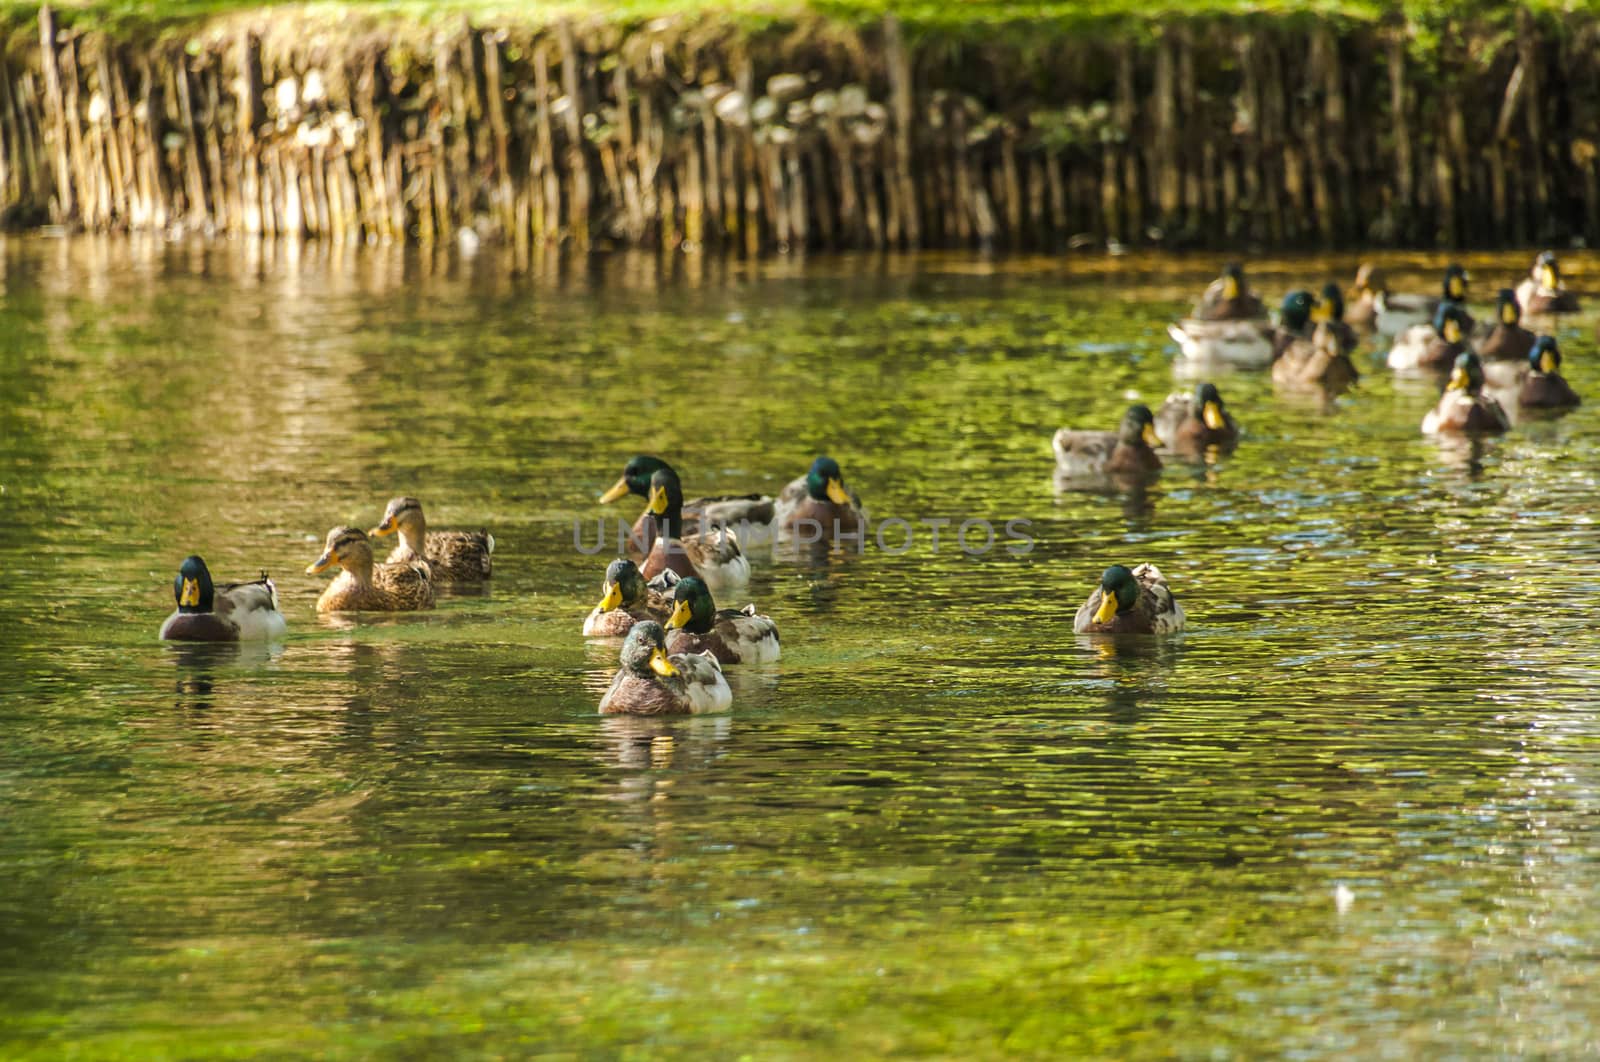 Many ducks swims on the water of a pond